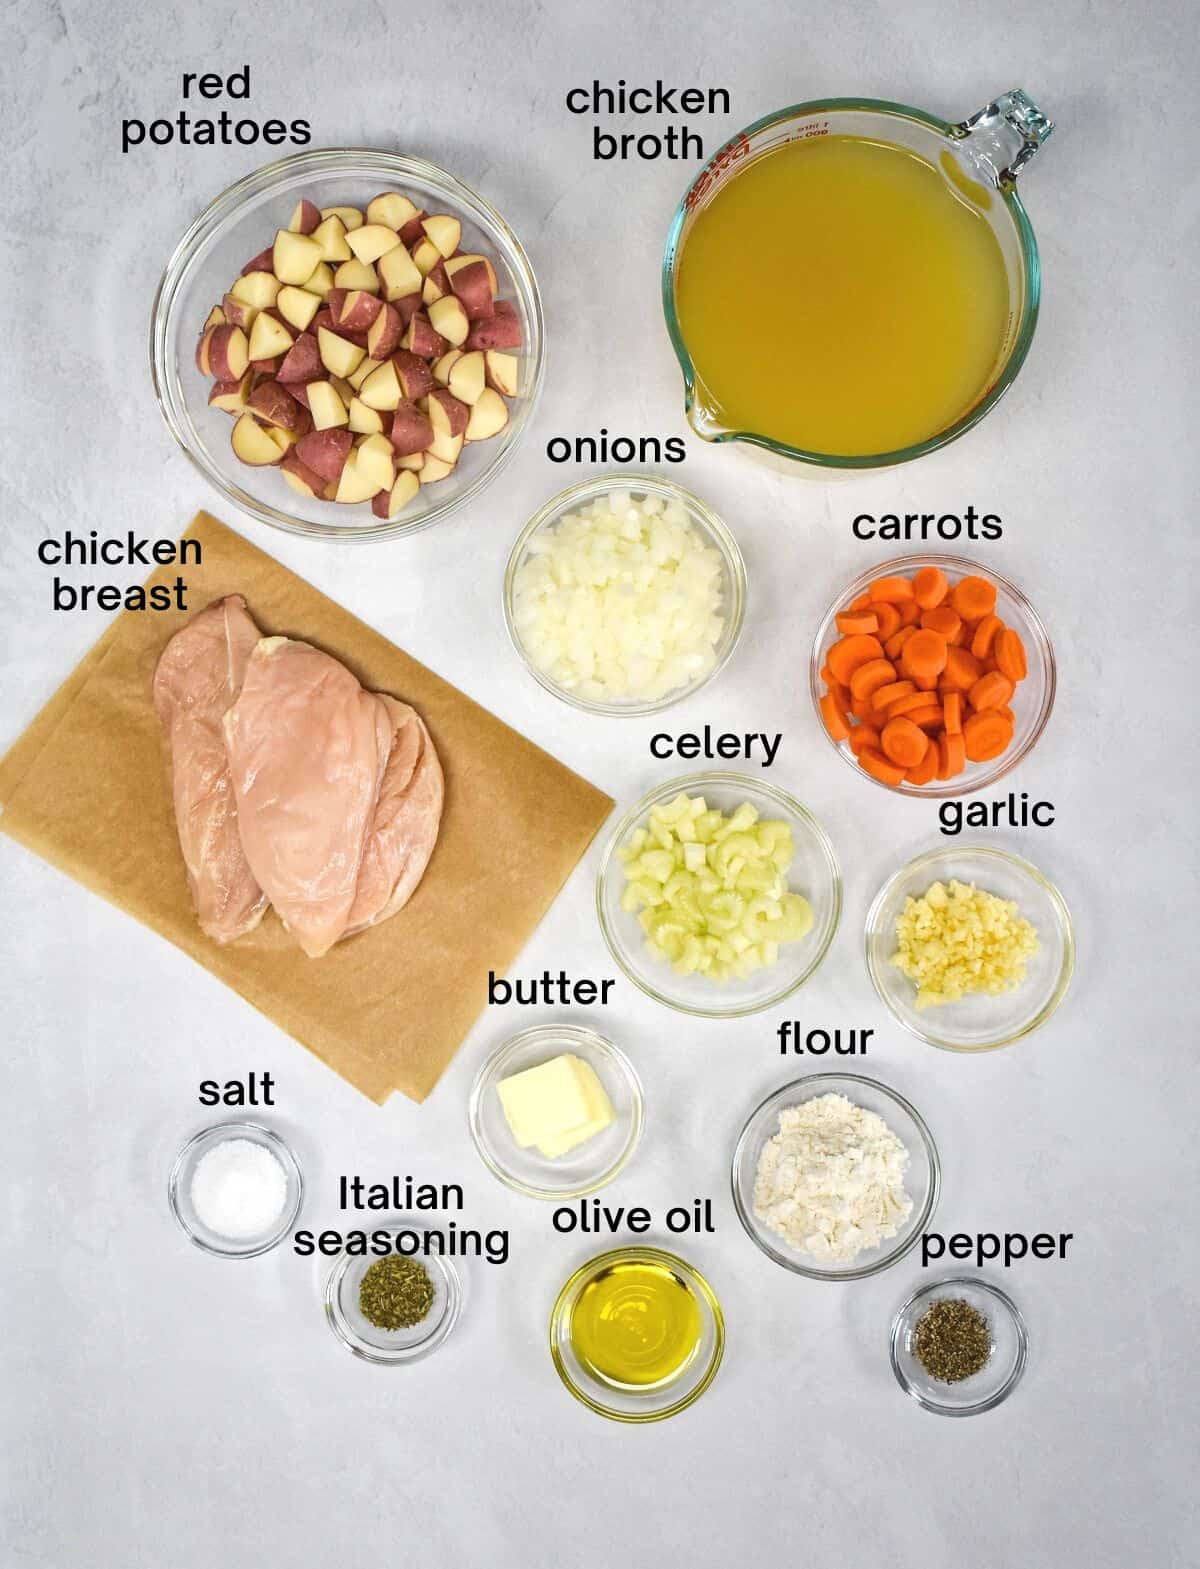 The ingredients for the chicken stew prepped and arranged in bowls on a white table.